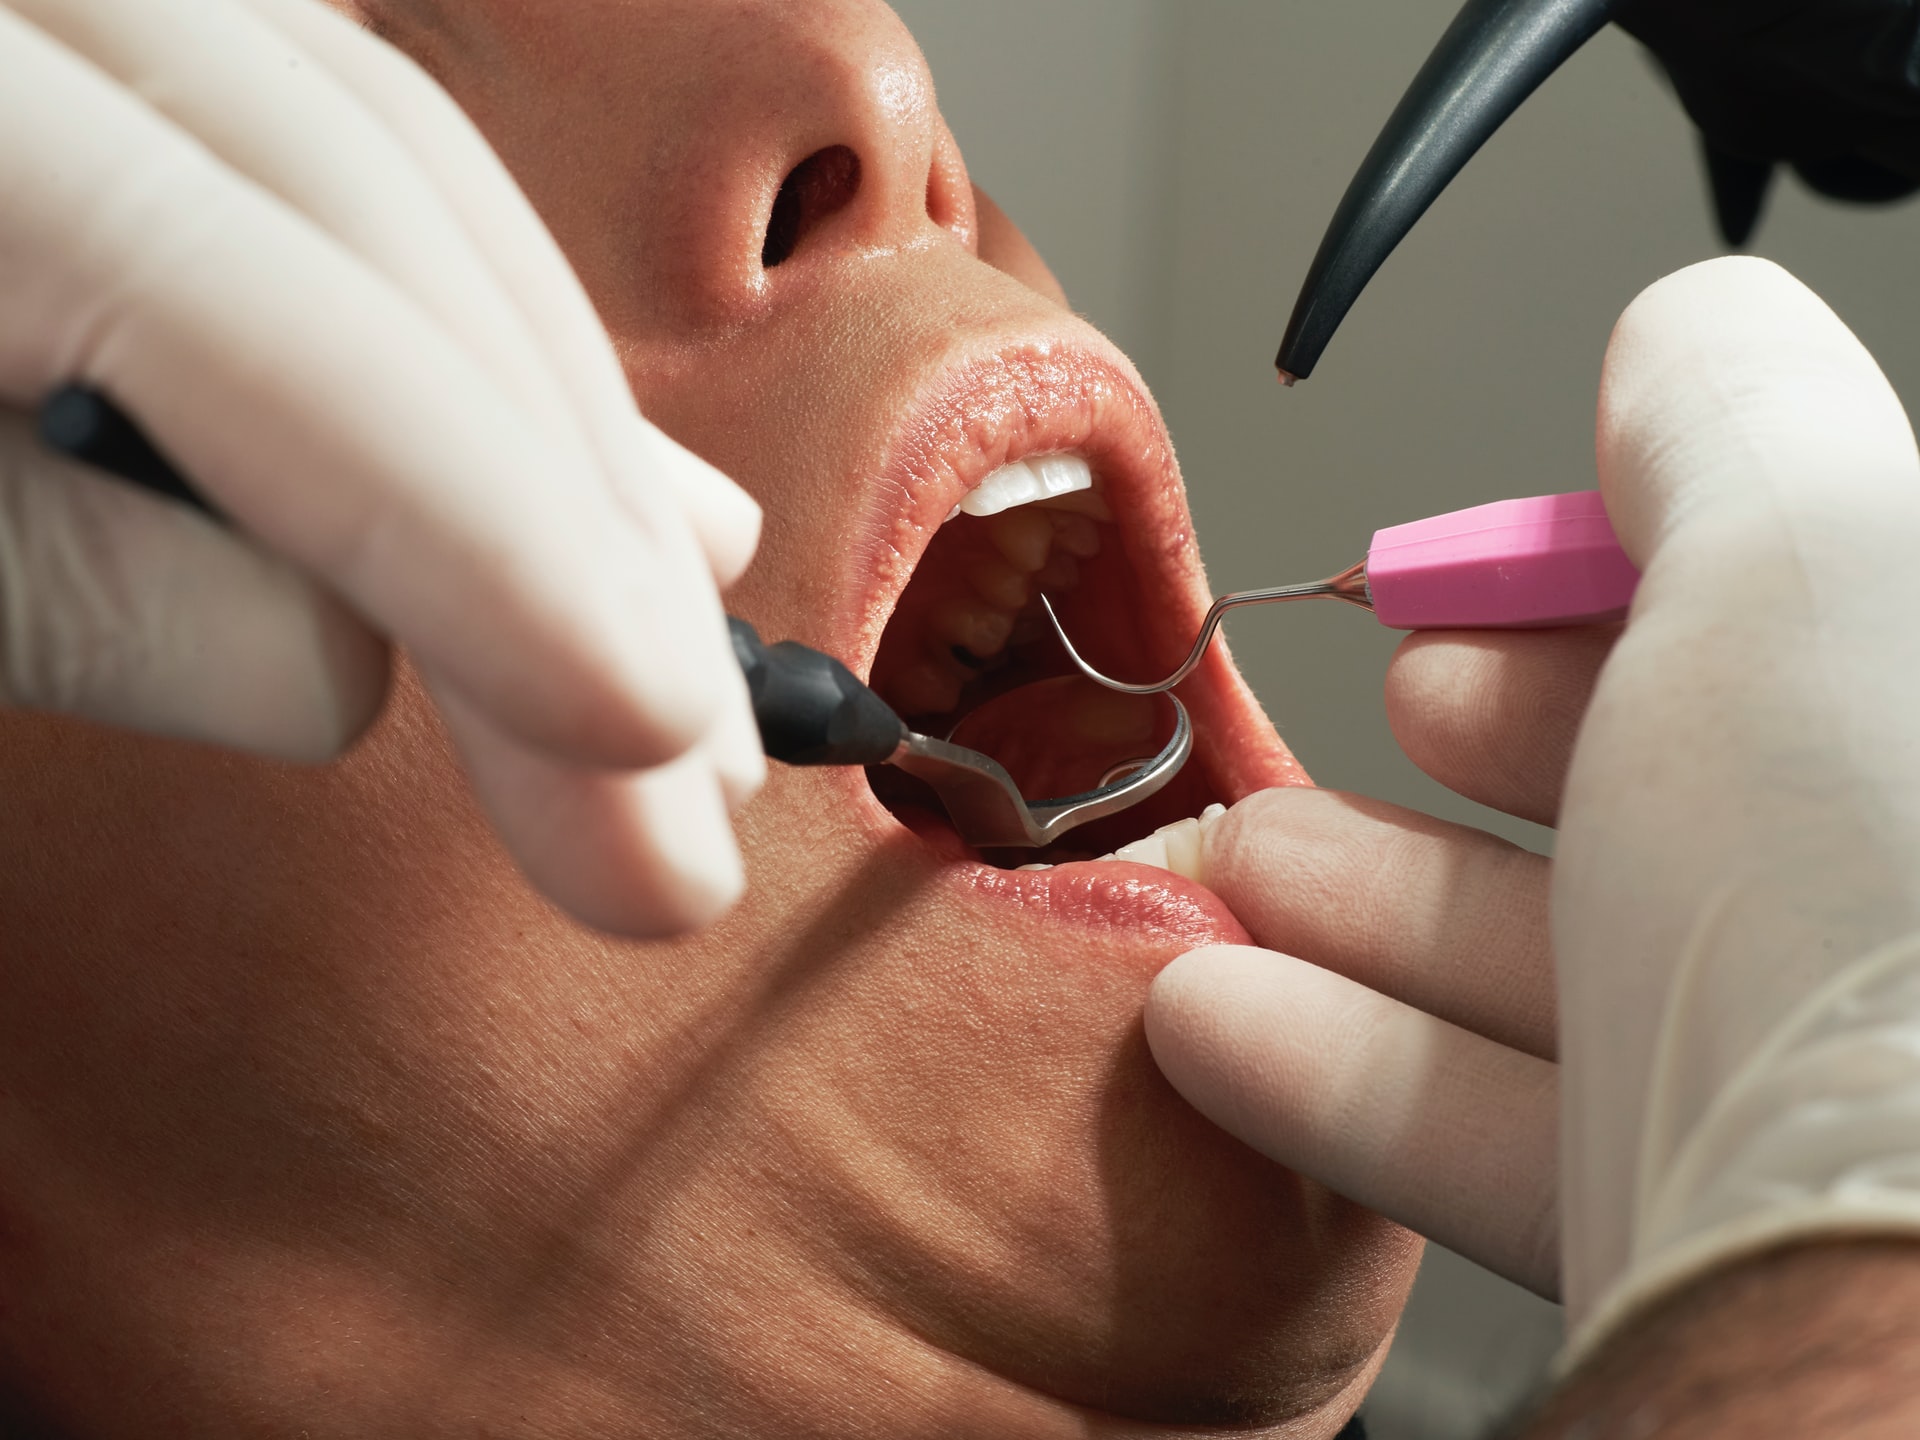 Our Guide To The Different Types Of Dental Surgery